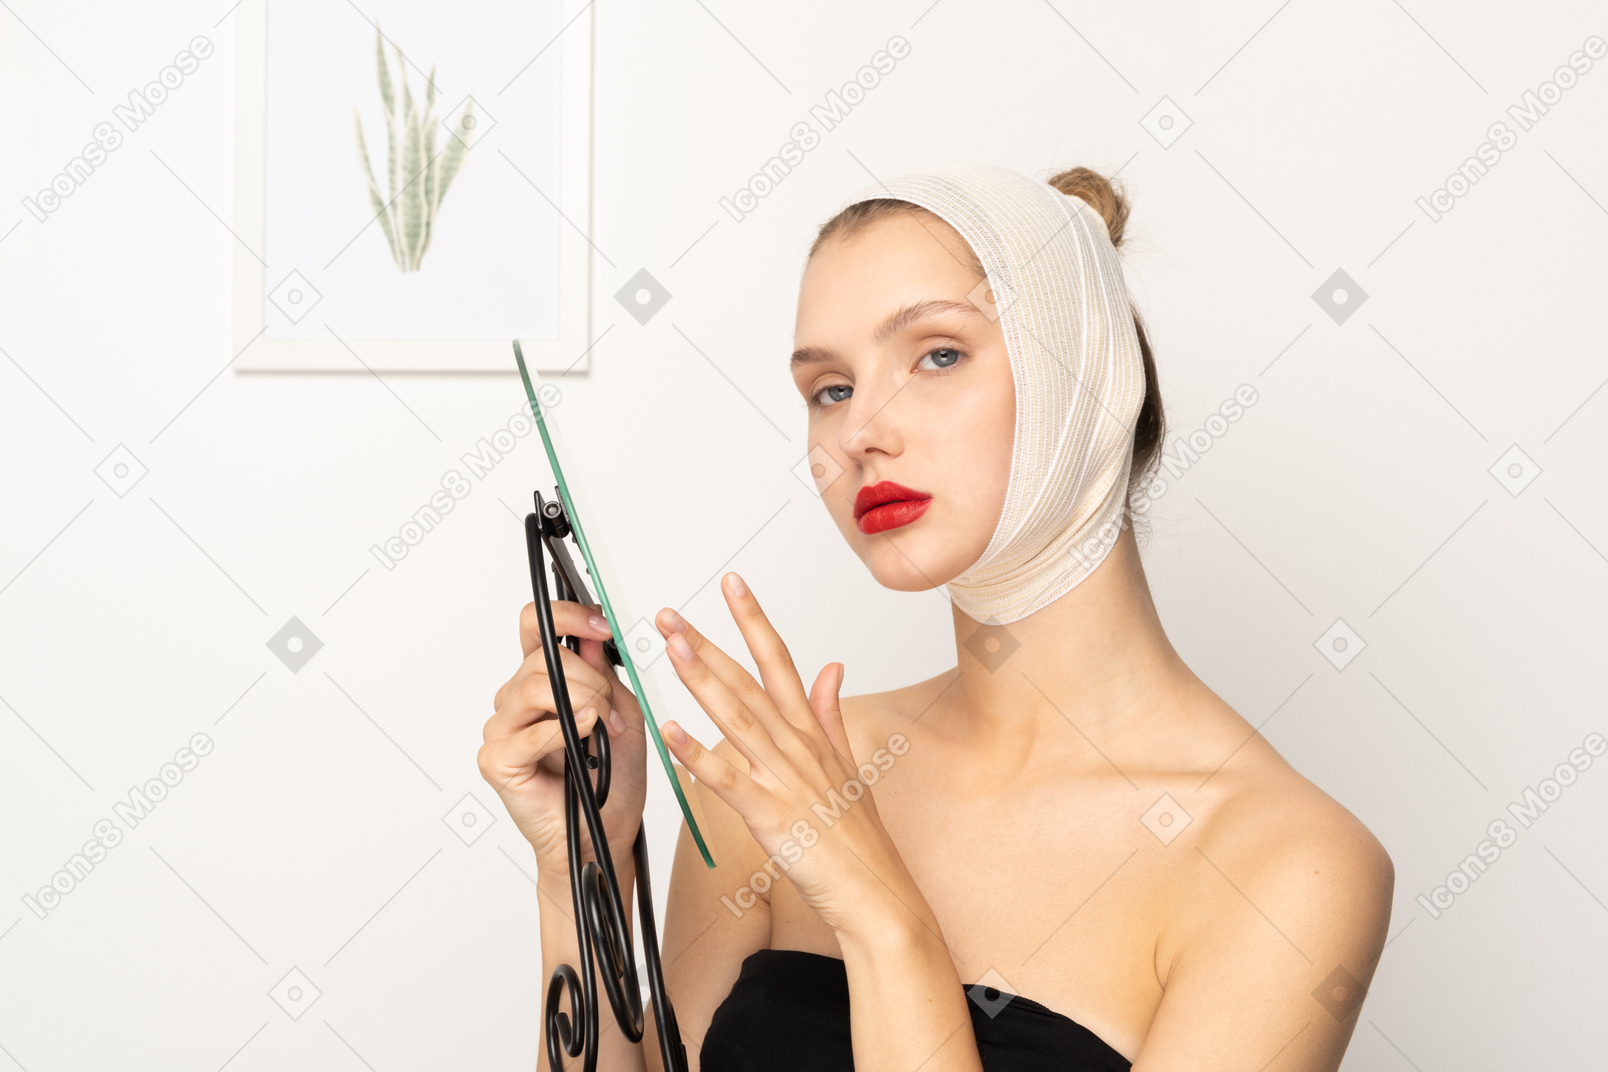 Young woman with bandaged head holding a mirror